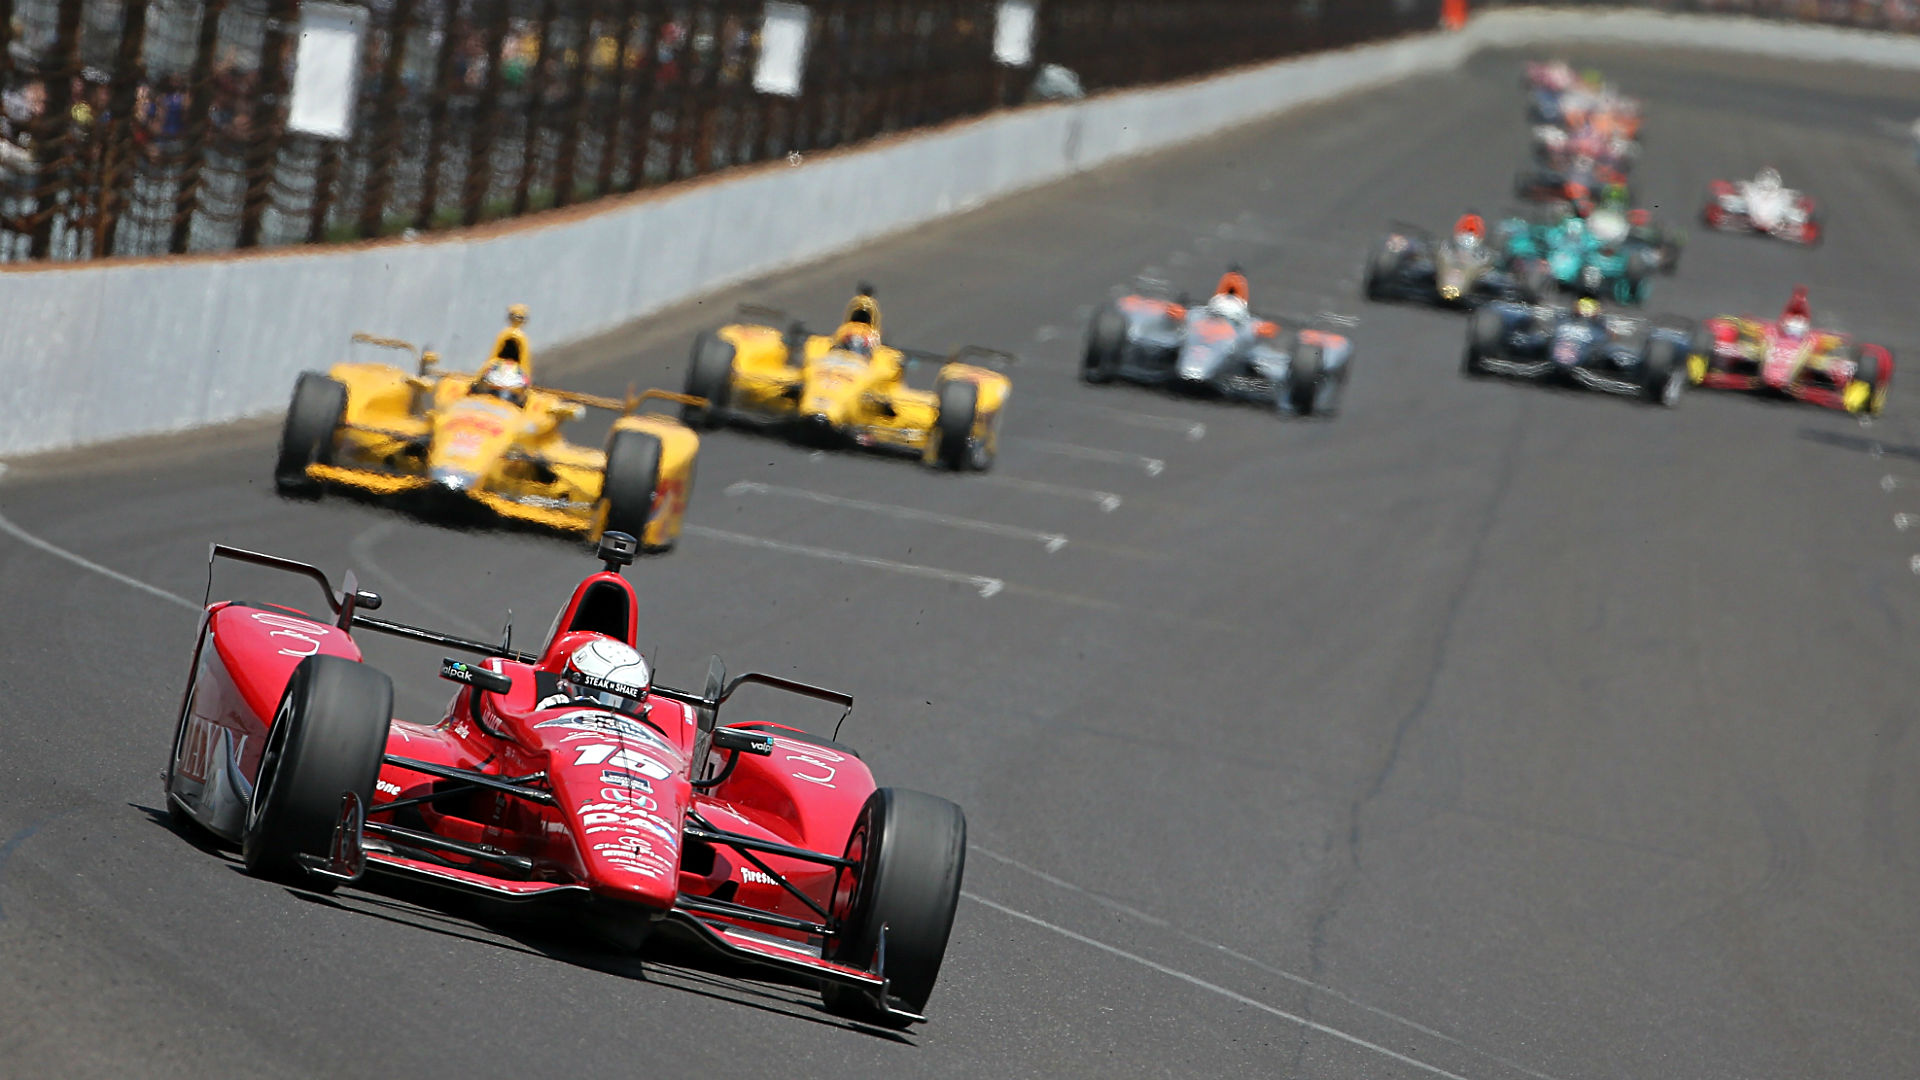 How to Watch the Indy 500 Without Cable on May 30